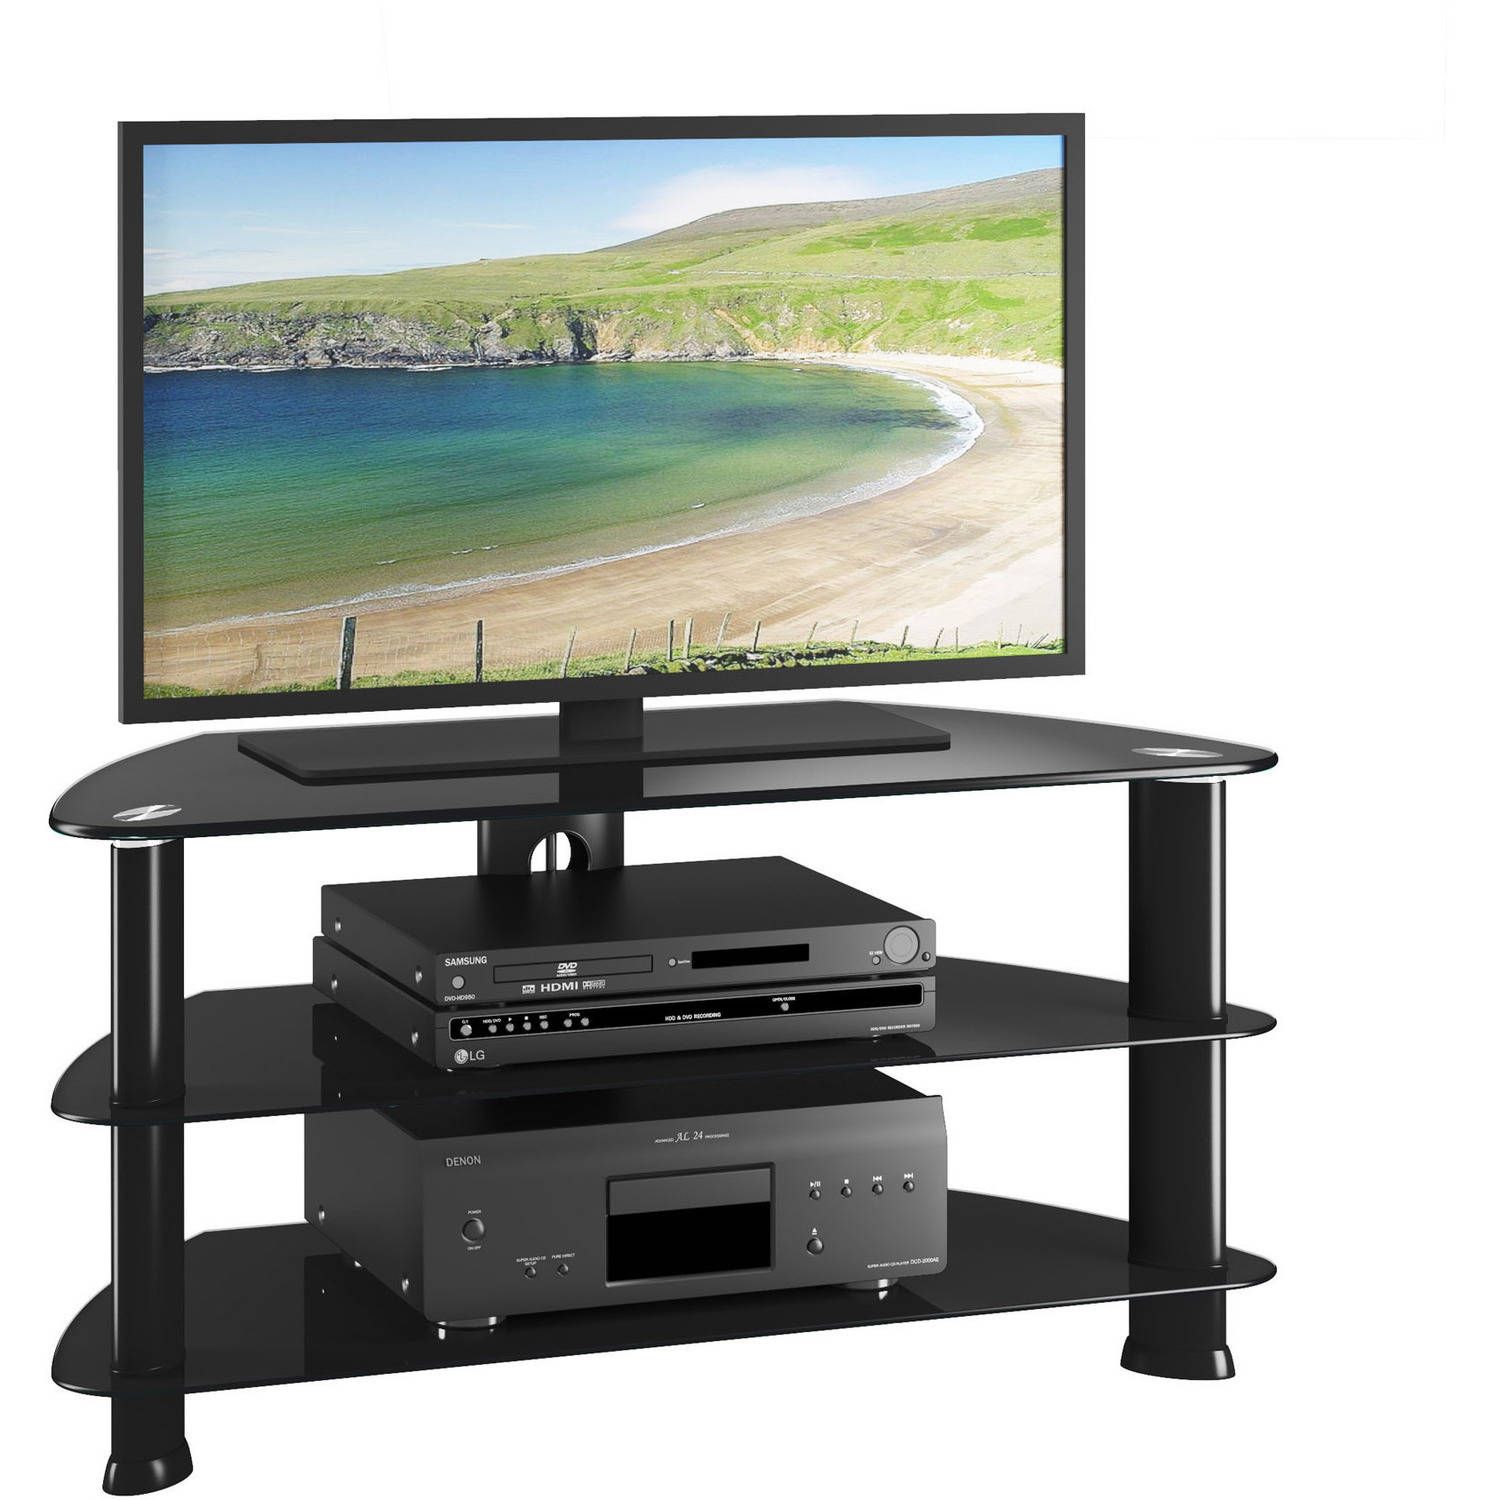 Laguna Satin Black Corner Tv Stand For Tvs Up To 50 Inside Tv Stands For Tvs Up To 50" (View 14 of 15)